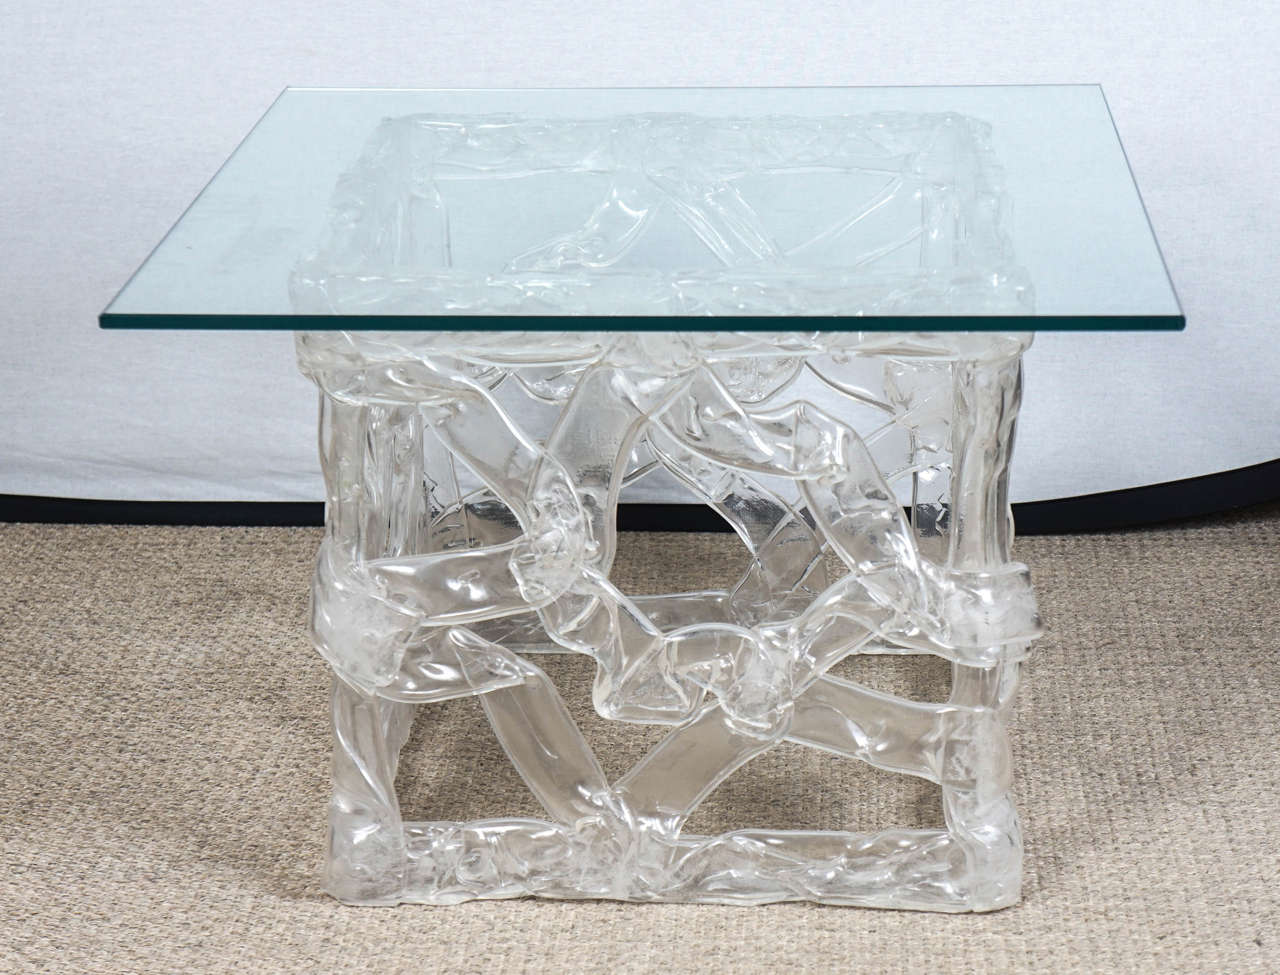 Here is a squared ribbon table in clear Lucite in the style of Tony Duquette.